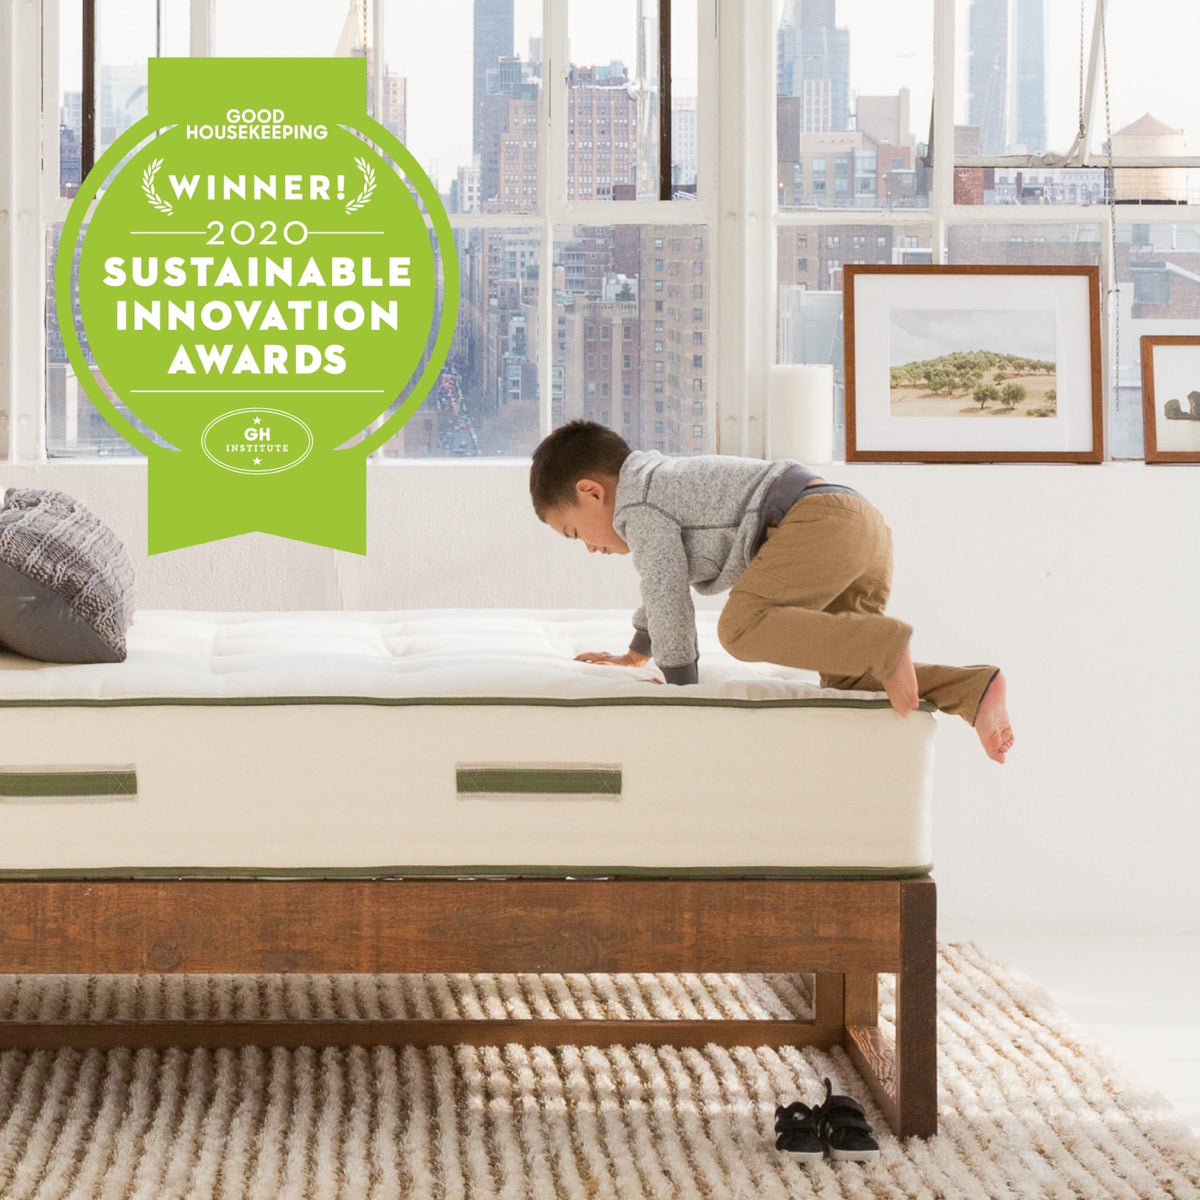 Avocado Green Mattress is Natural, Organic and Sustainable